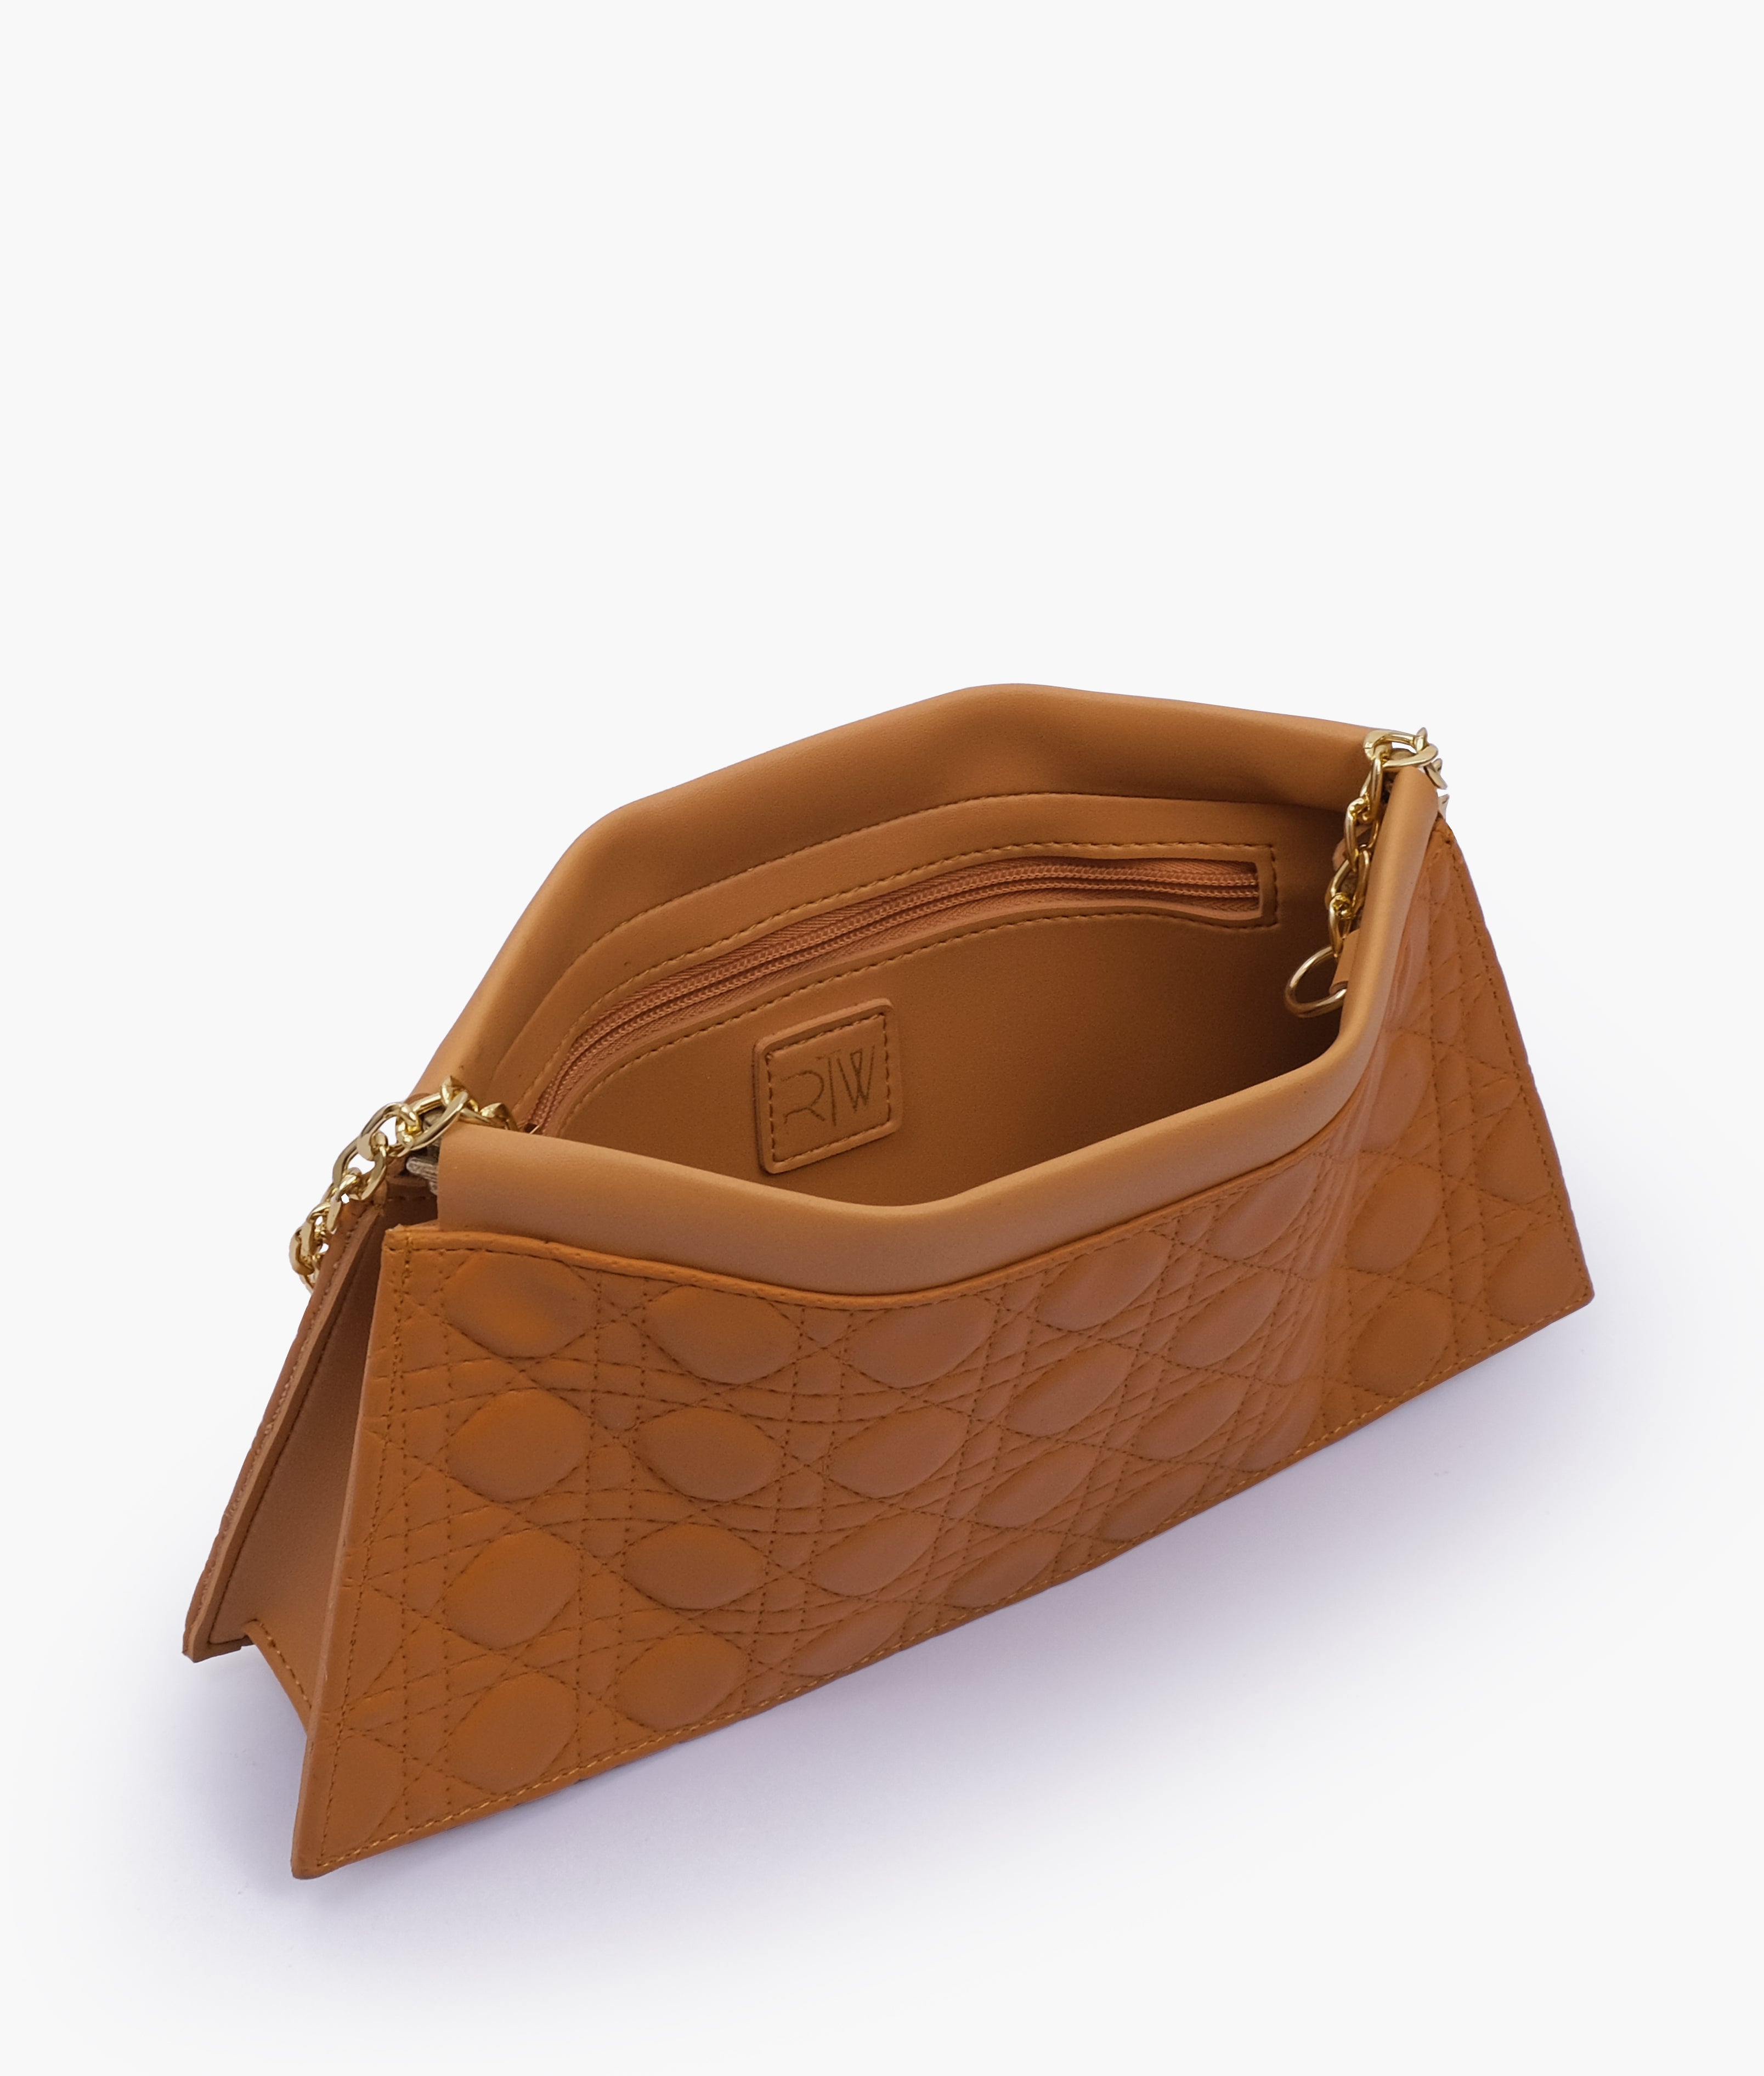 Mustard quilted evening clutch with snap closure